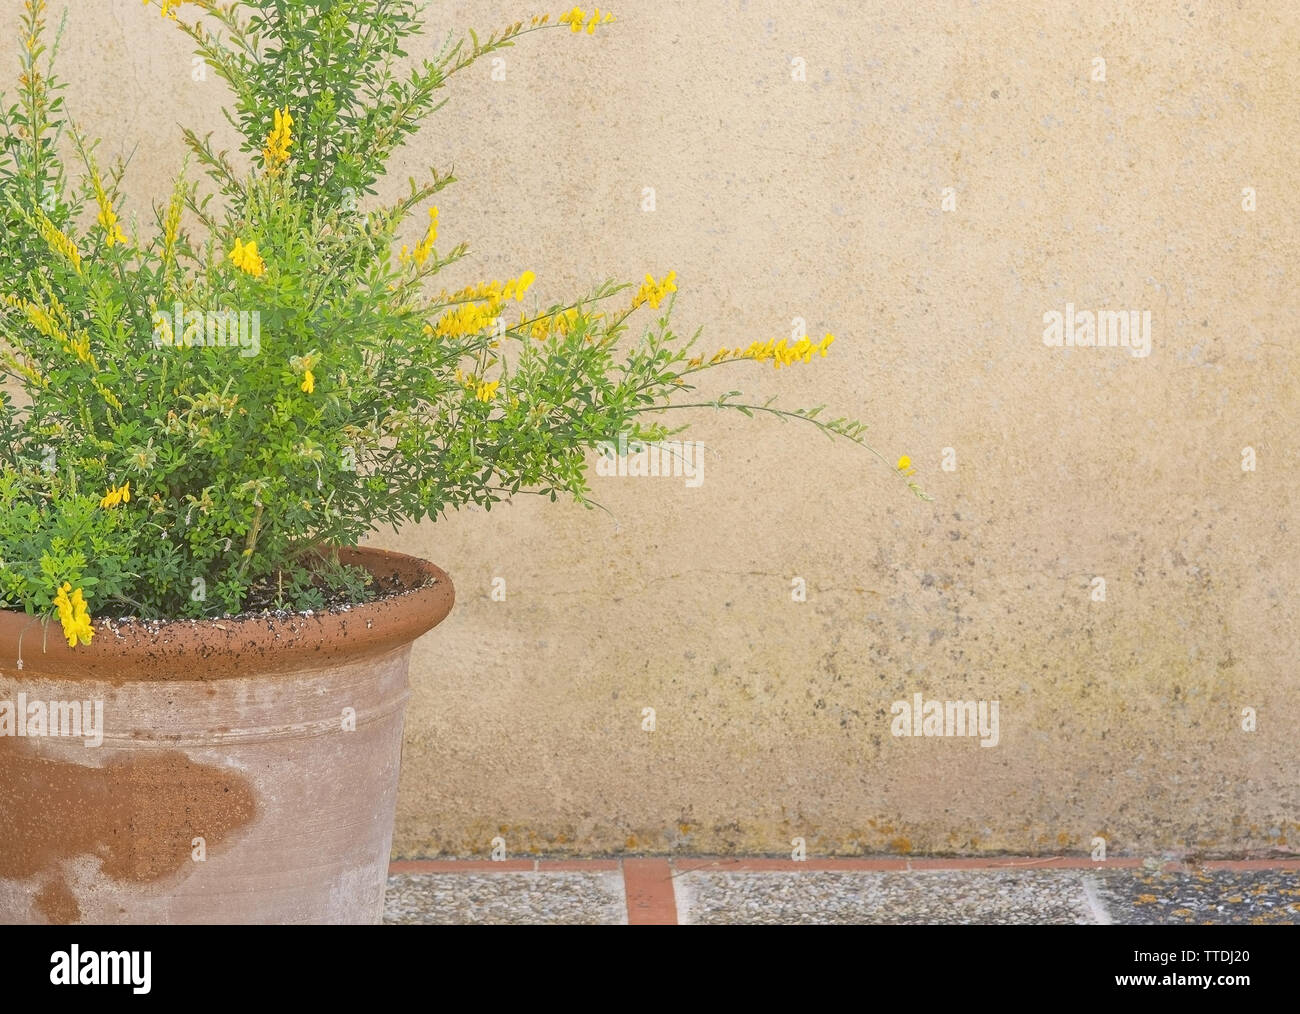 Yellow broom genista flowers on branches with green leaves in terracotta pot background copy space. Stock Photo